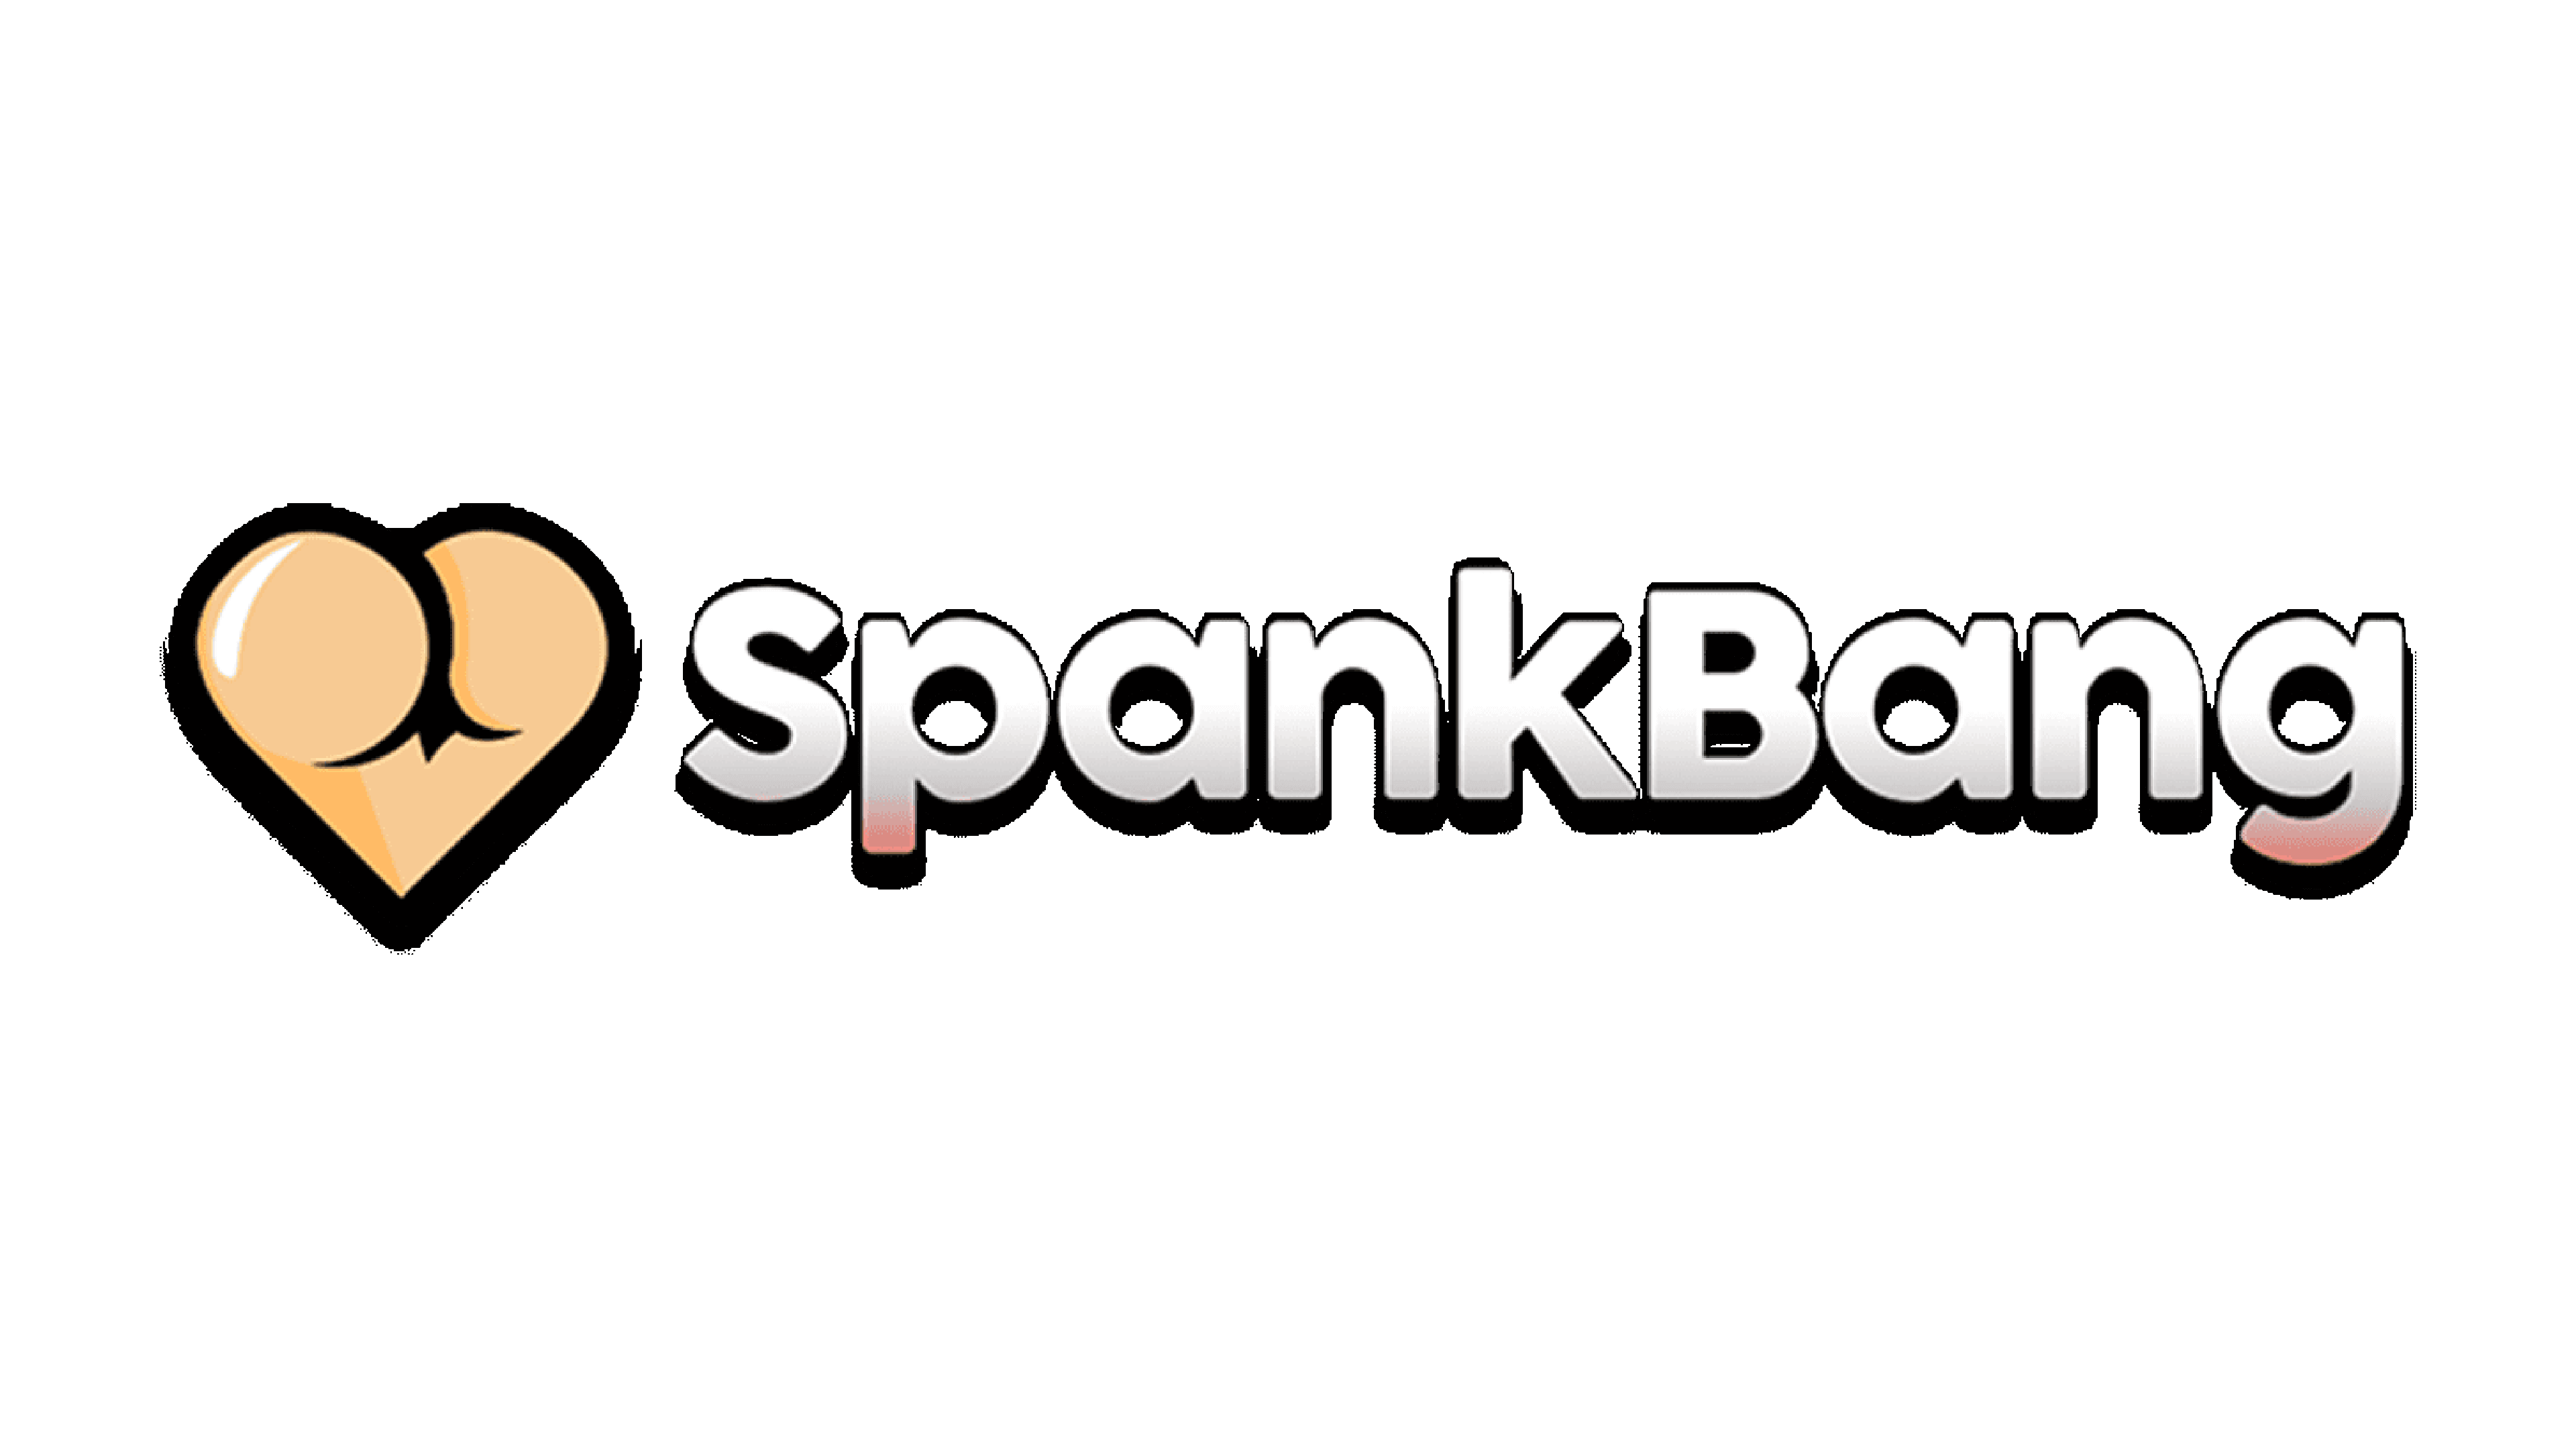 Inspiration Spankbang Logo Facts Meaning History And Png Logocharts Your 1 Source For 